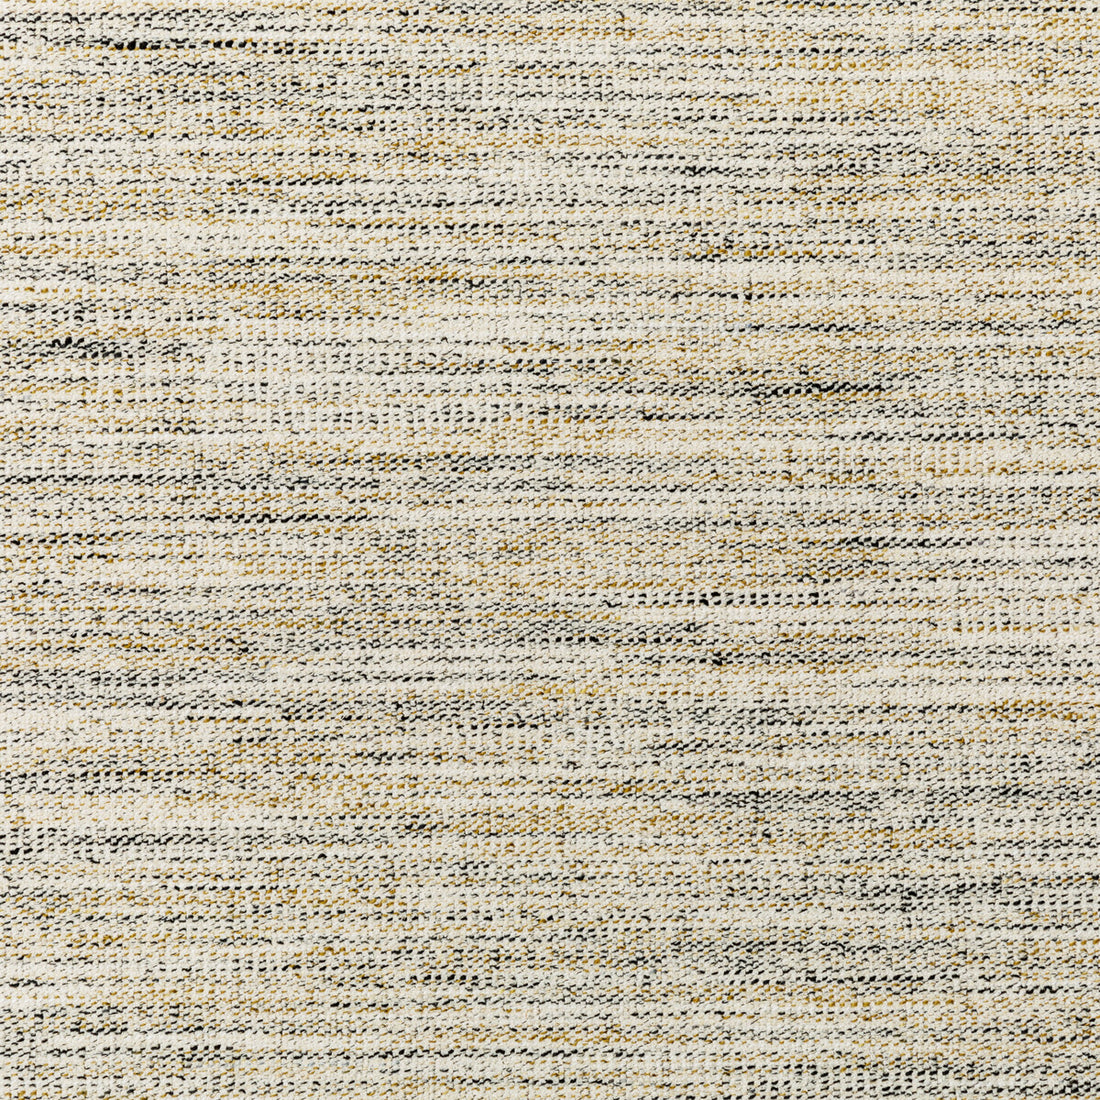 Kravet Smart fabric in 36297-421 color - pattern 36297.421.0 - by Kravet Smart in the Performance Crypton Home collection